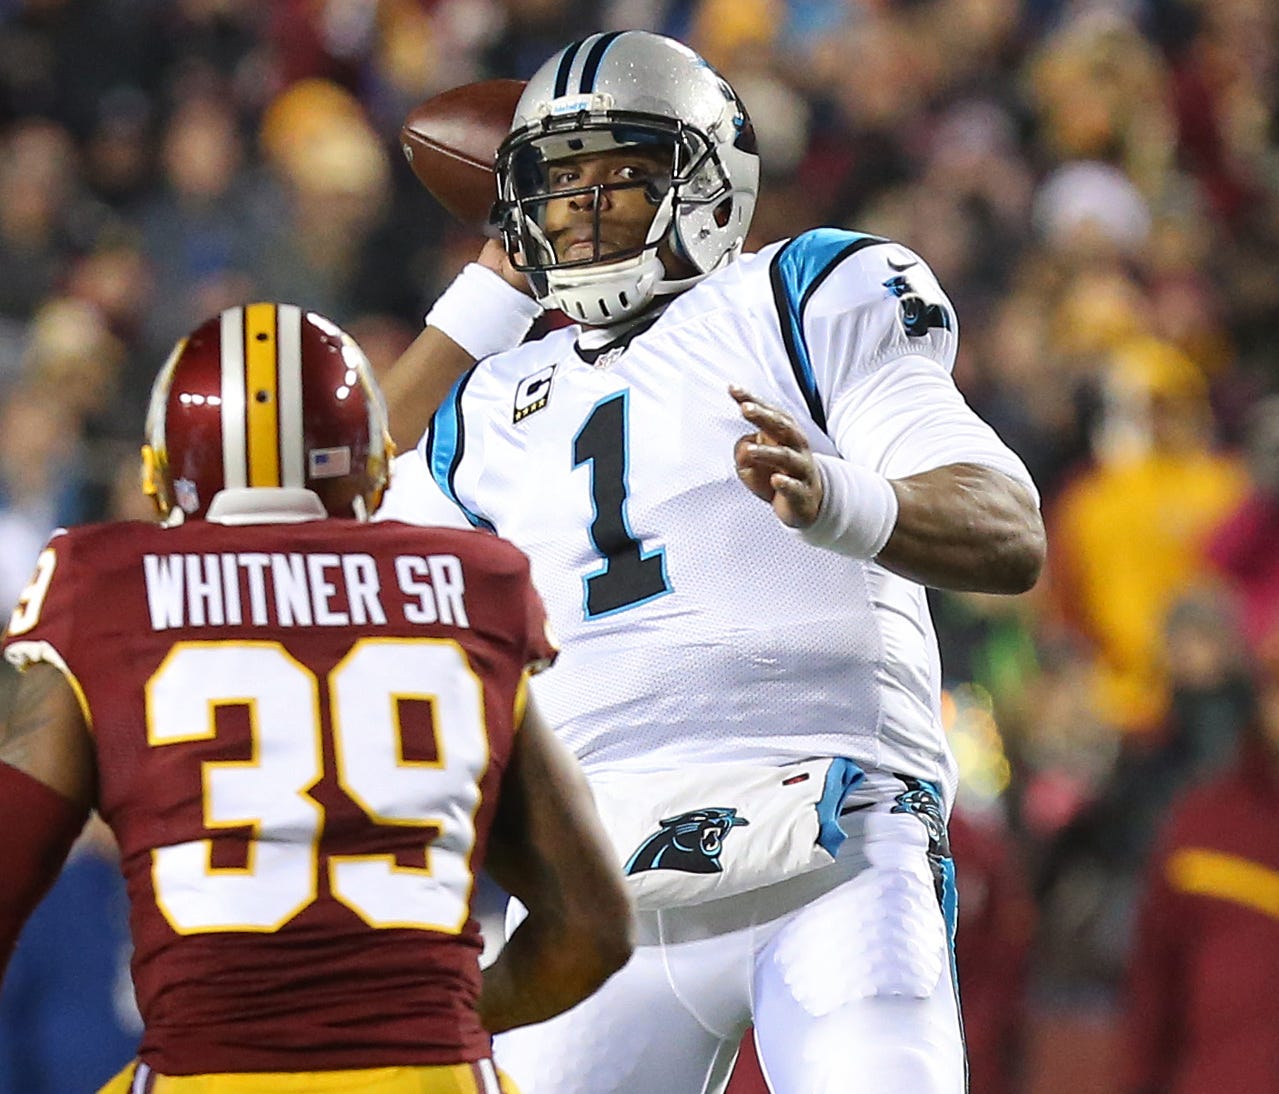 Cam Newton's Panthers were looking for their sixth win of the season Monday night.